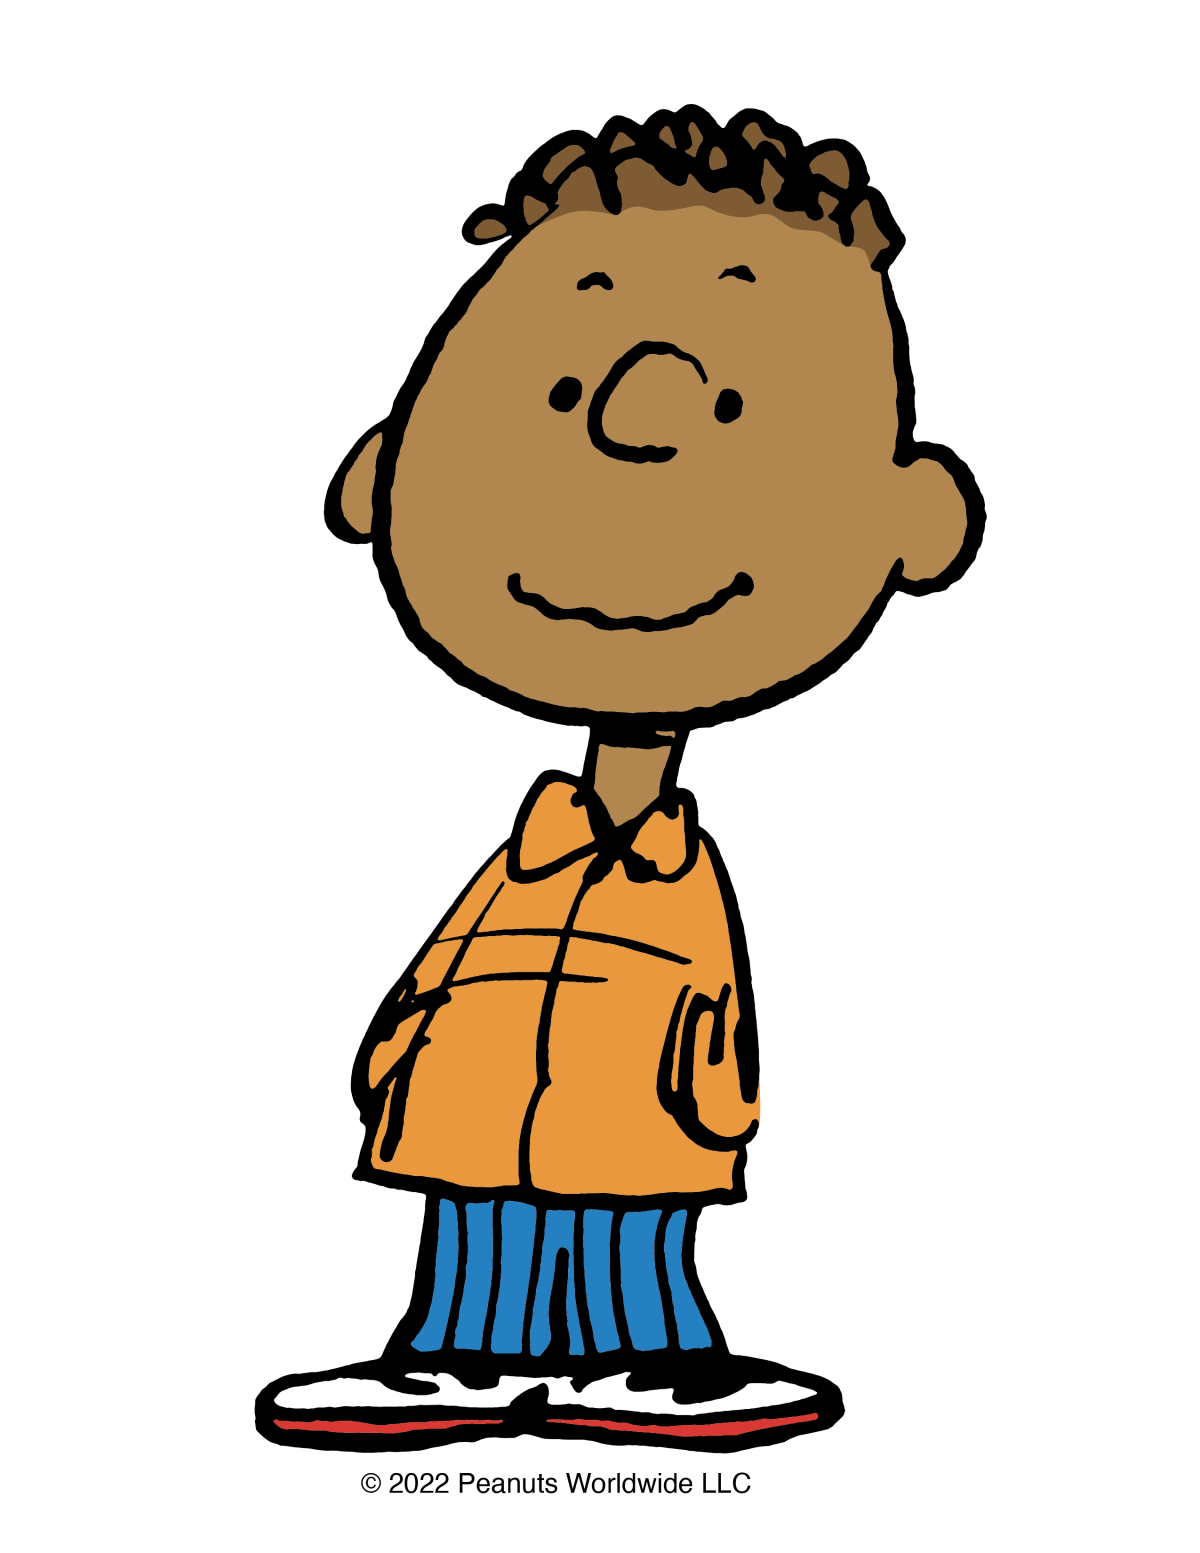 Illustration of Franklin Armstrong from Peanuts in an orange shirt and blue pants.